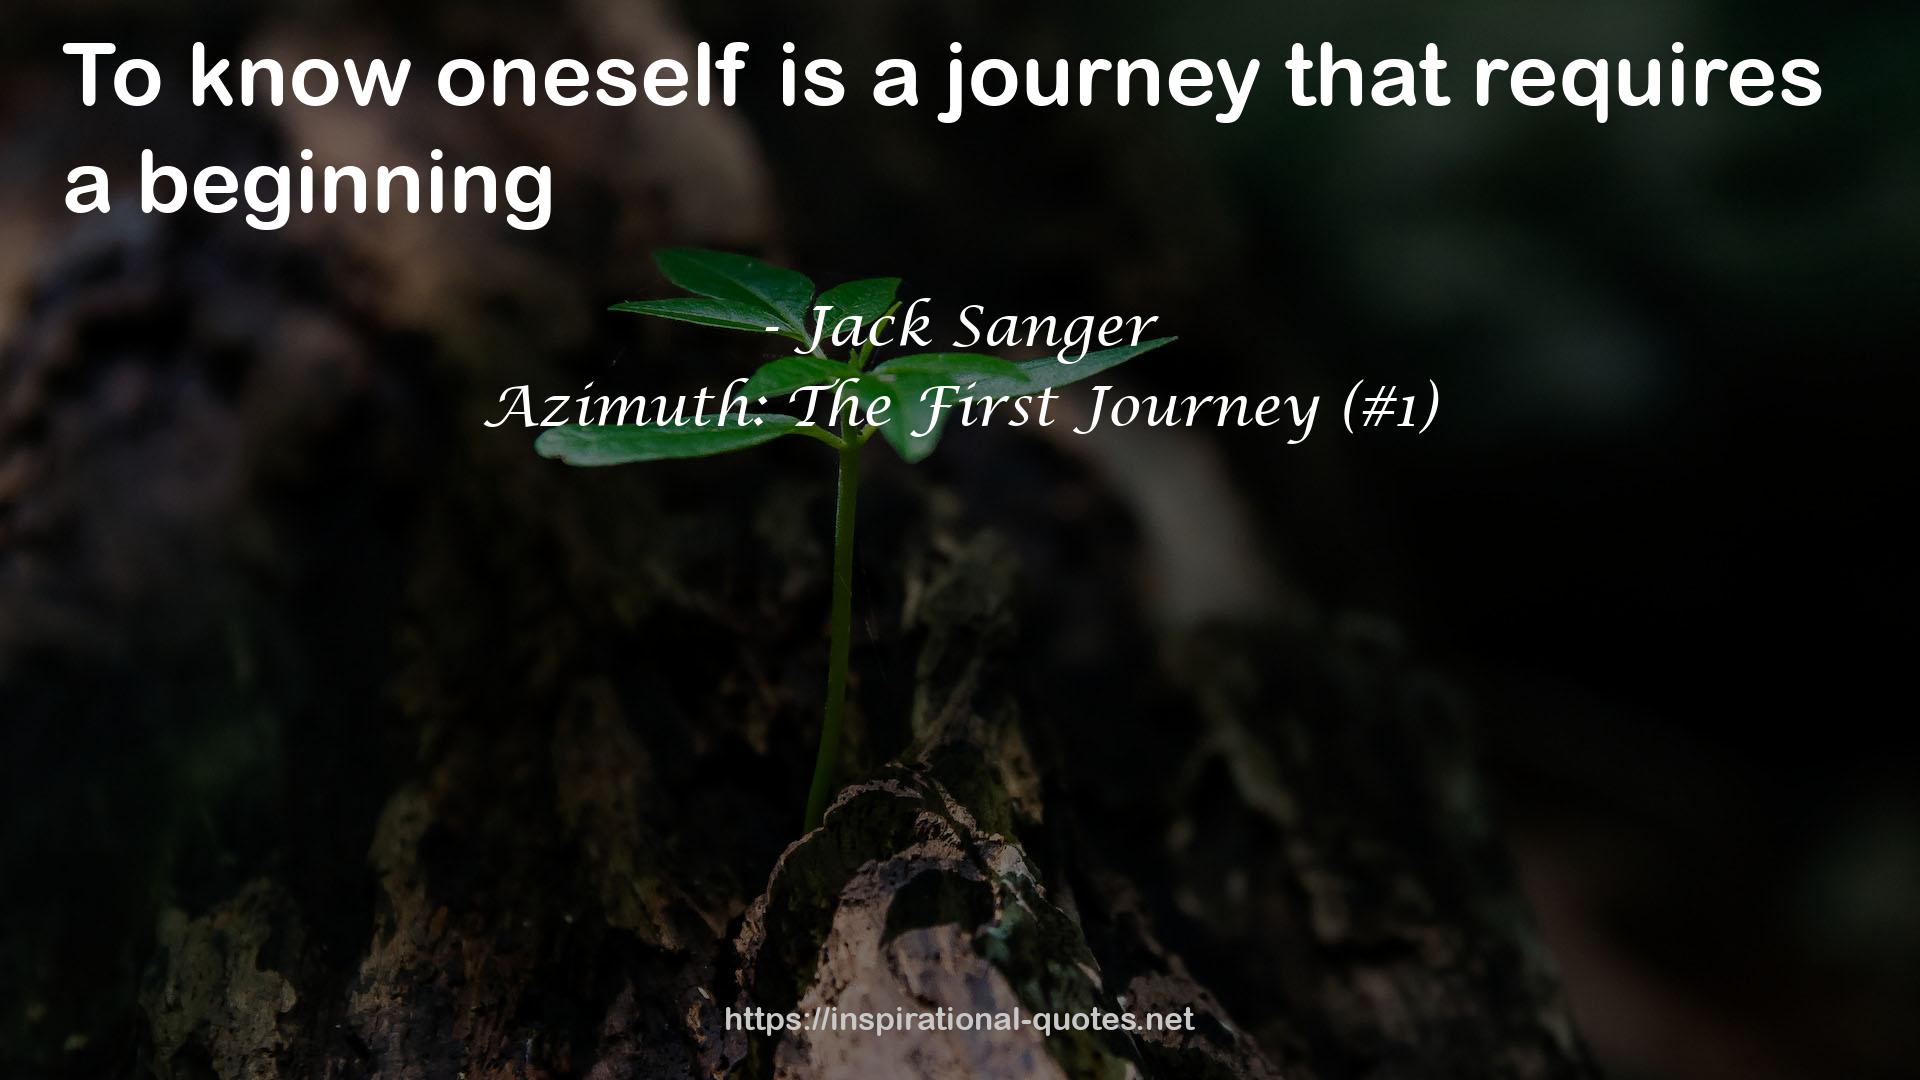 Azimuth: The First Journey (#1) QUOTES